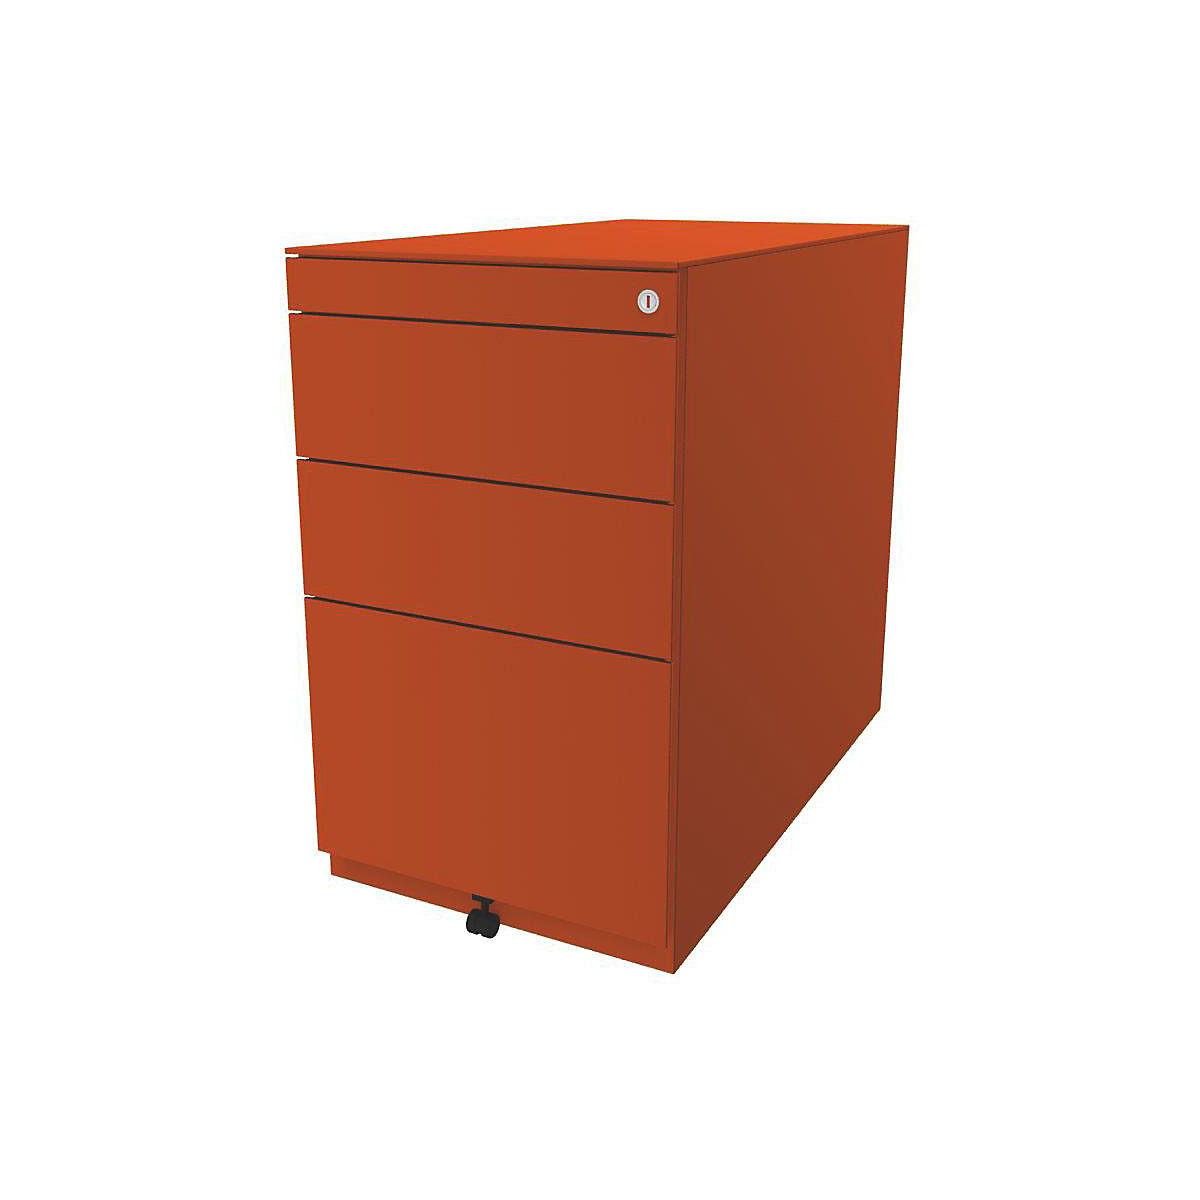 Note™ fixed pedestal, with 2 universal drawers, 1 suspension file drawer – BISLEY, with top, depth 775 mm, orange-7